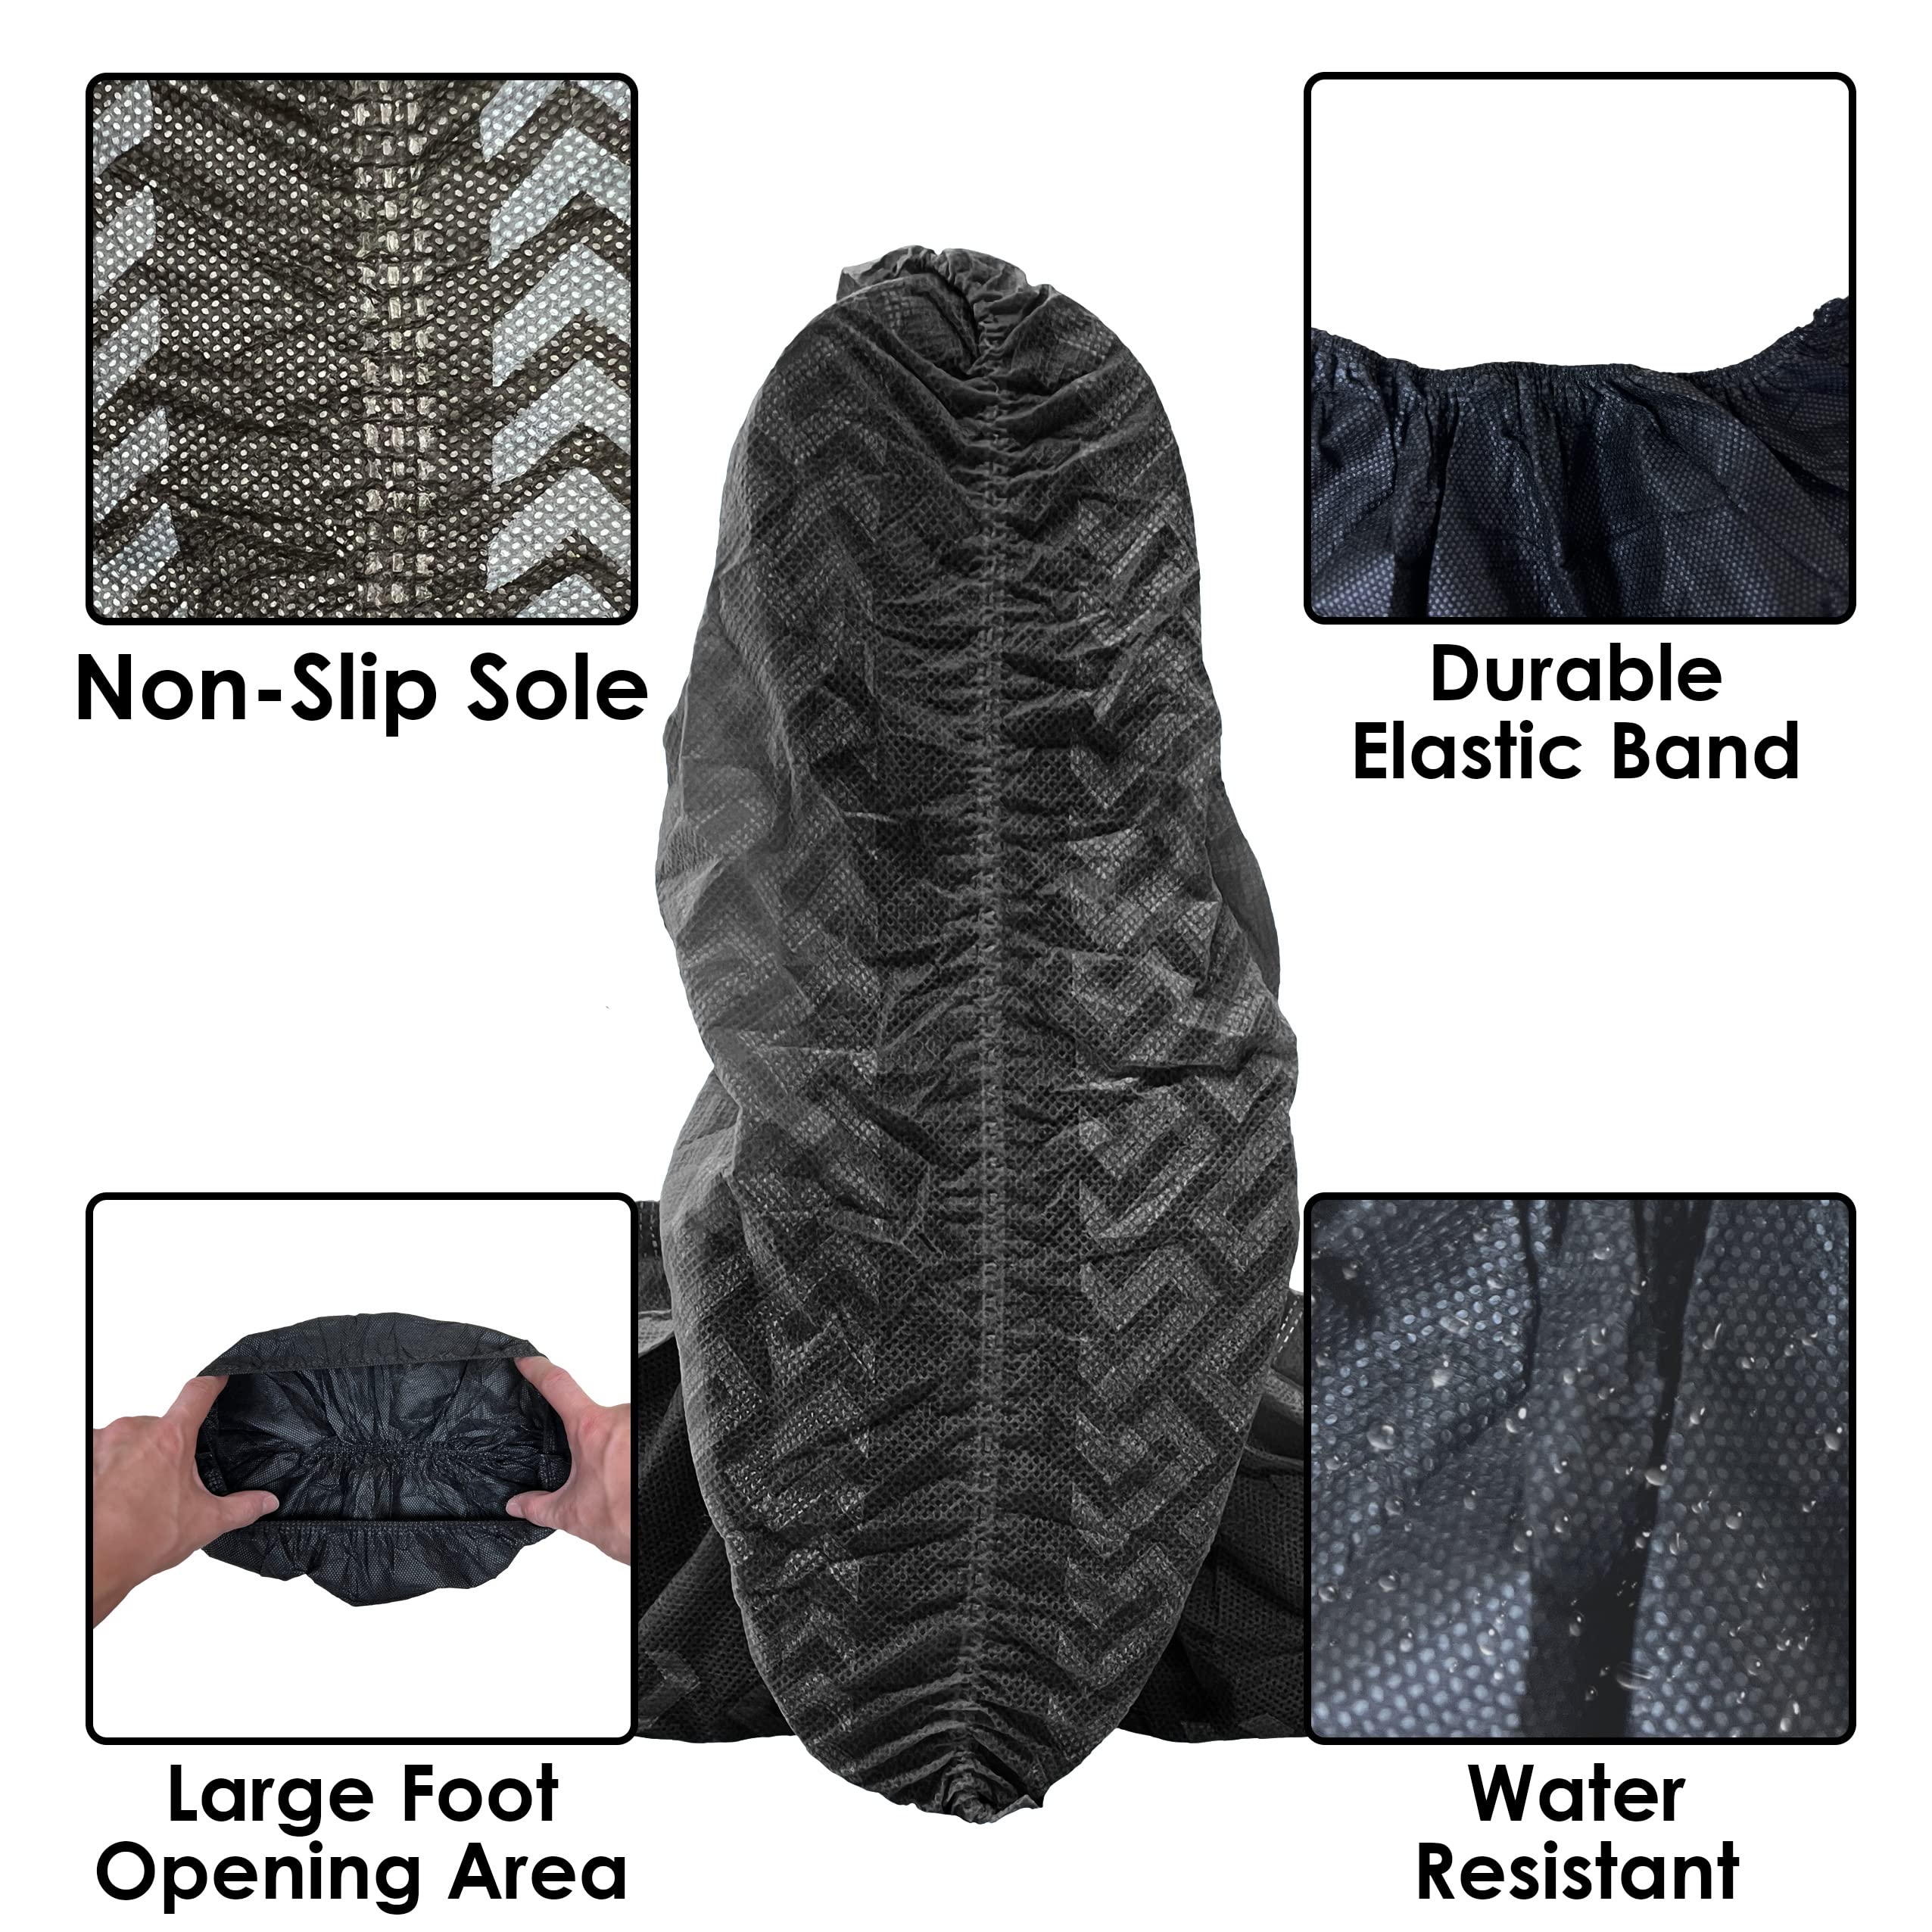 Buena Goods 100 Pack Extra Large Disposable Black Boot & Shoe Covers. Reusable Premium Water Resistant Durable Booties with Non Slip Treads for Indoor Use. Fits US Men's Size 14 & Women's 16 Shoe Size